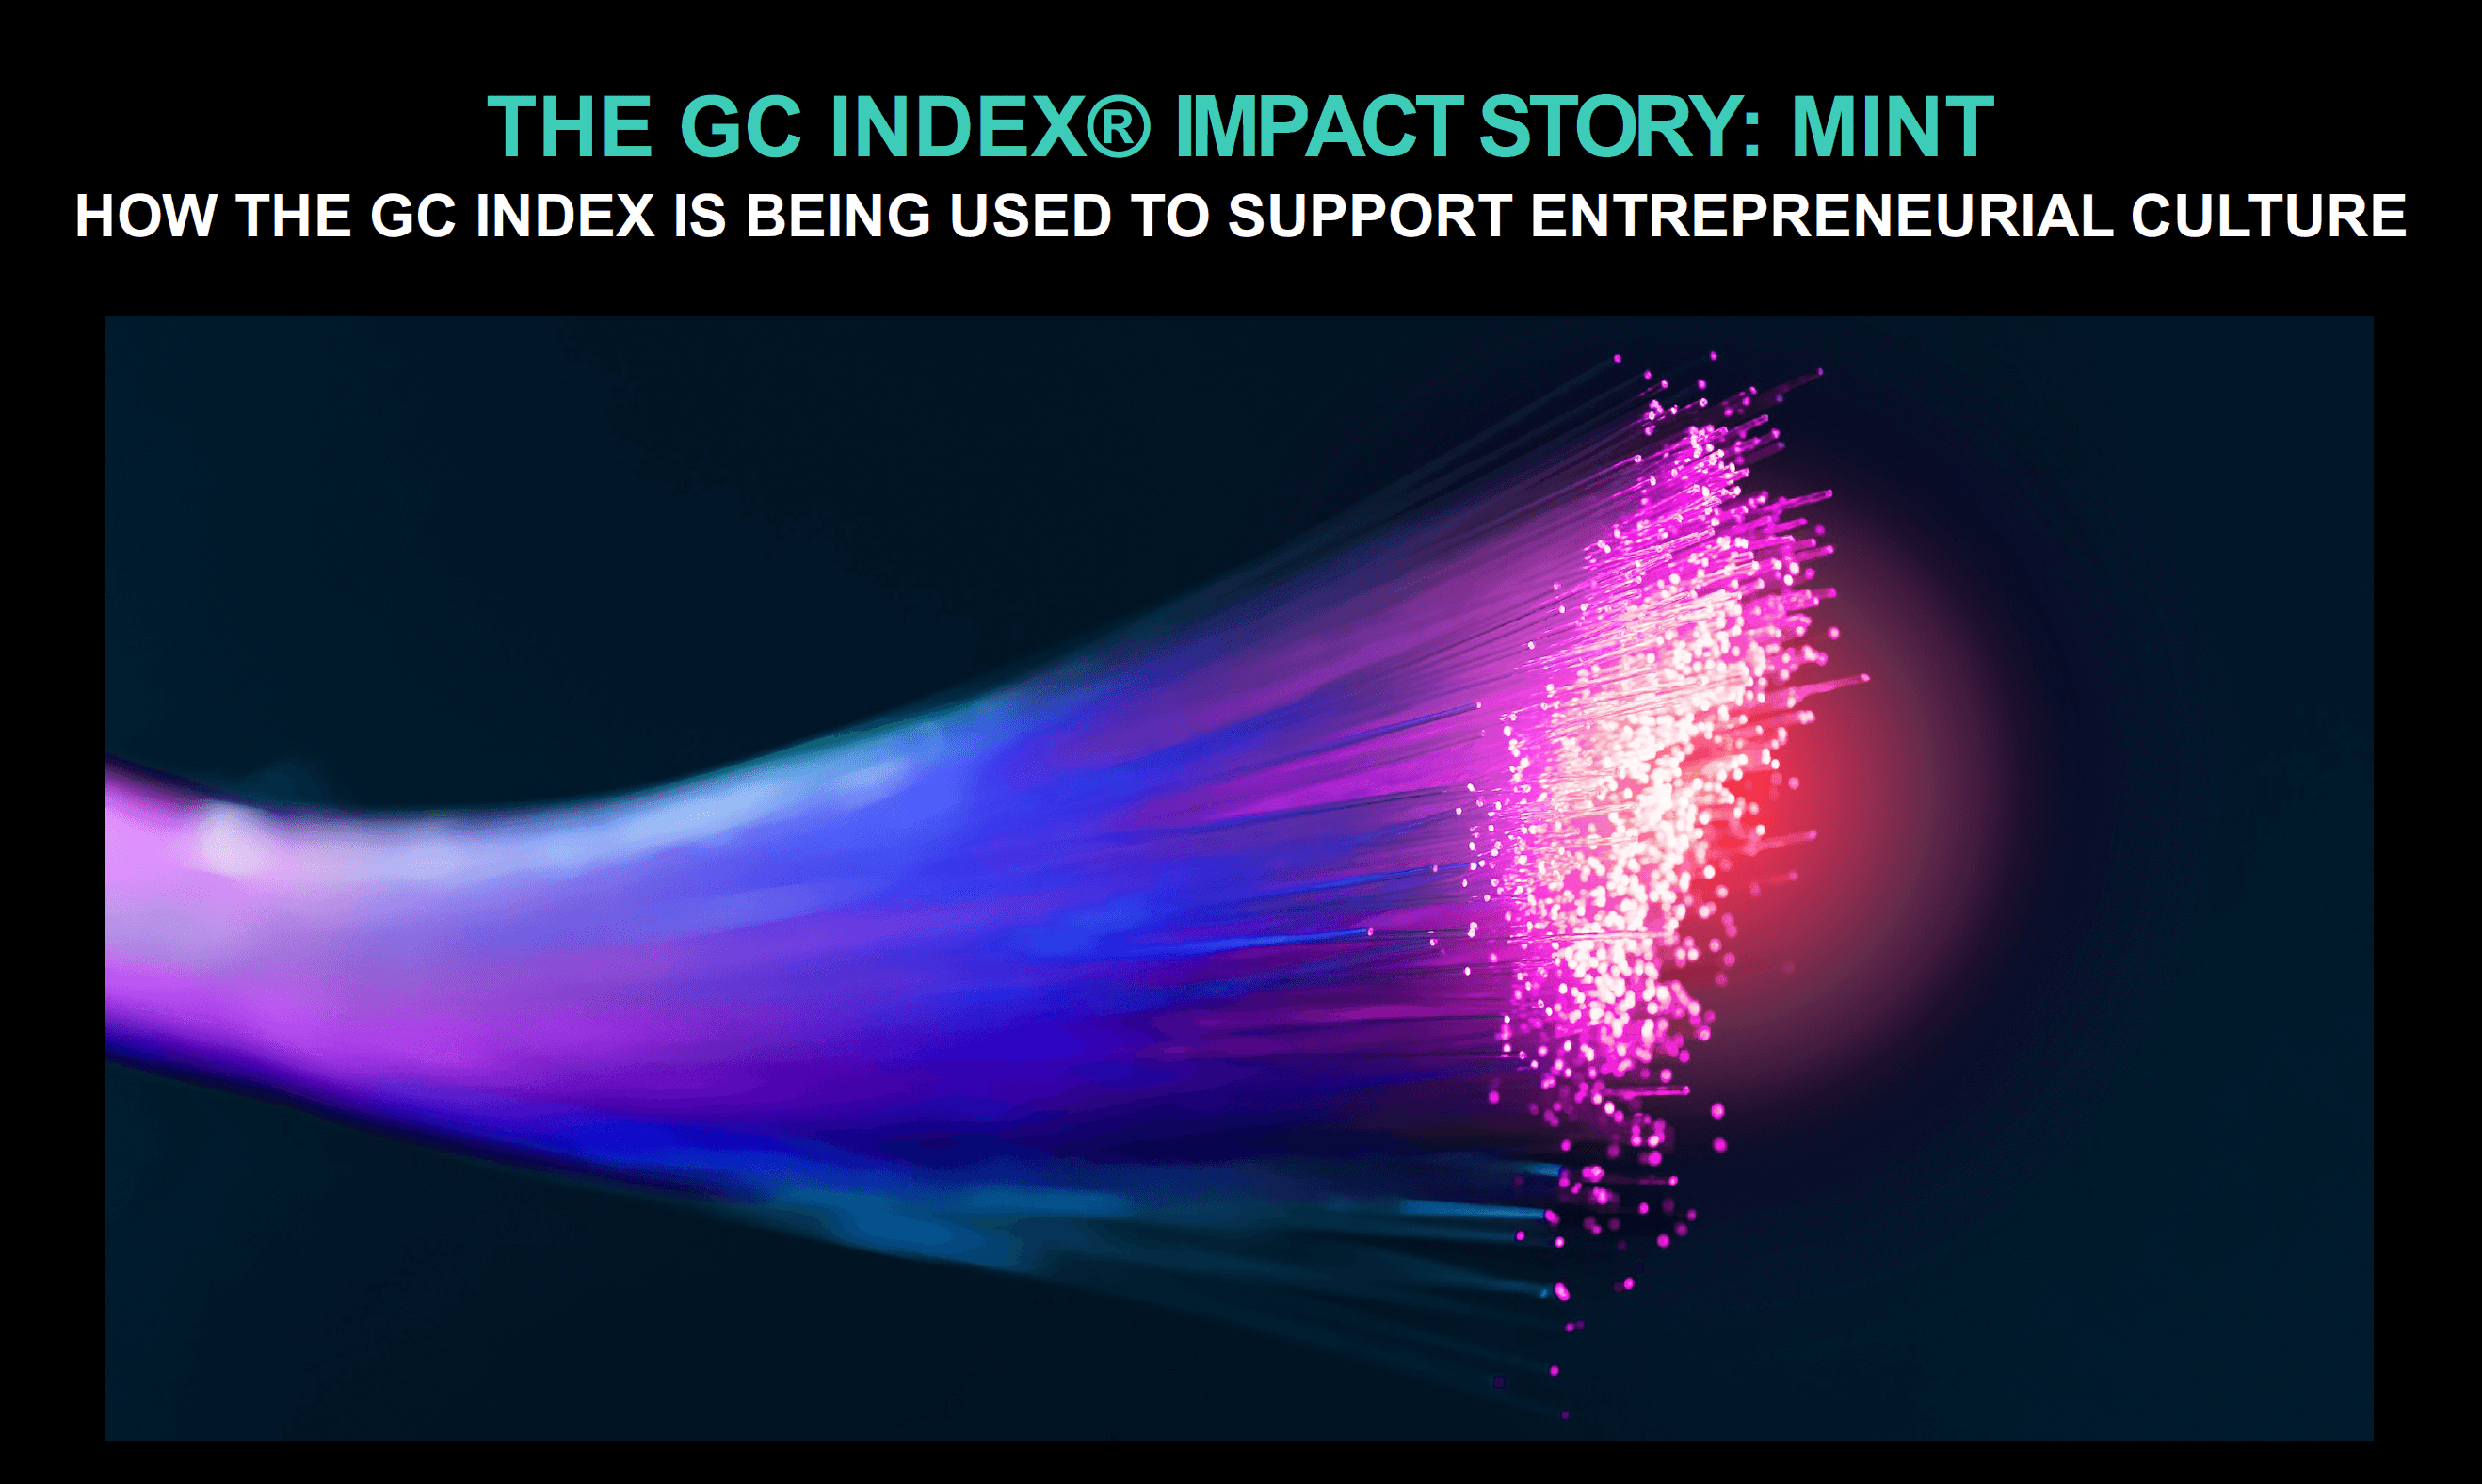 HOW THE GC INDEX IS BEING USED TO SUPPORT ENTREPRENEURIAL CULTURE